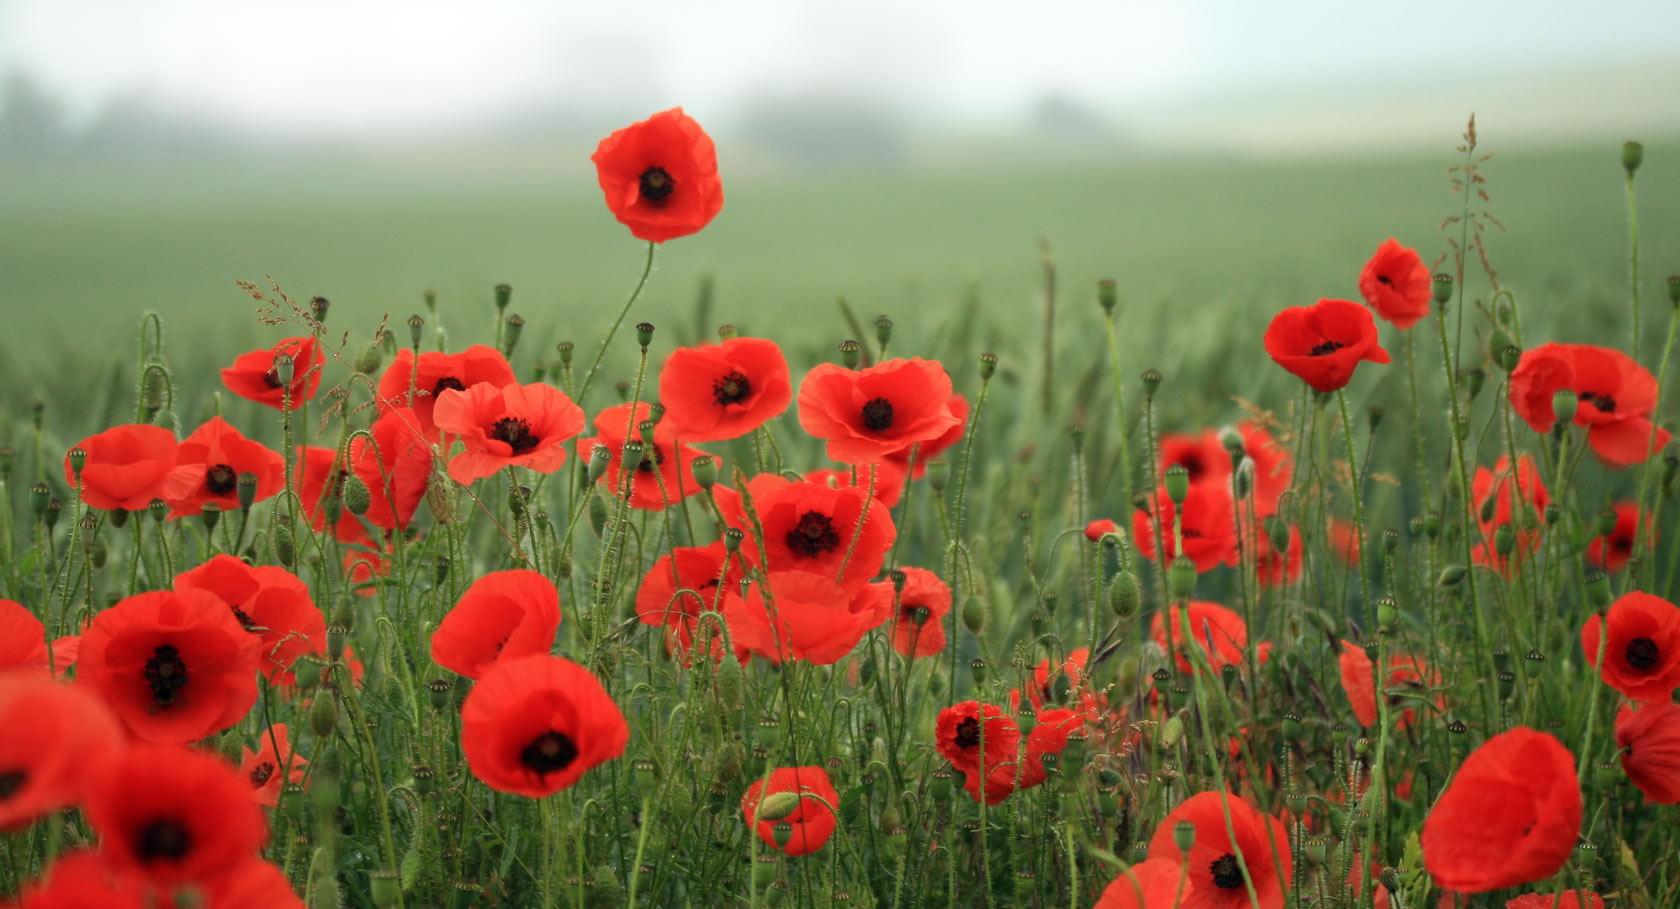 Services of Remembrance for Armistice Day 2018